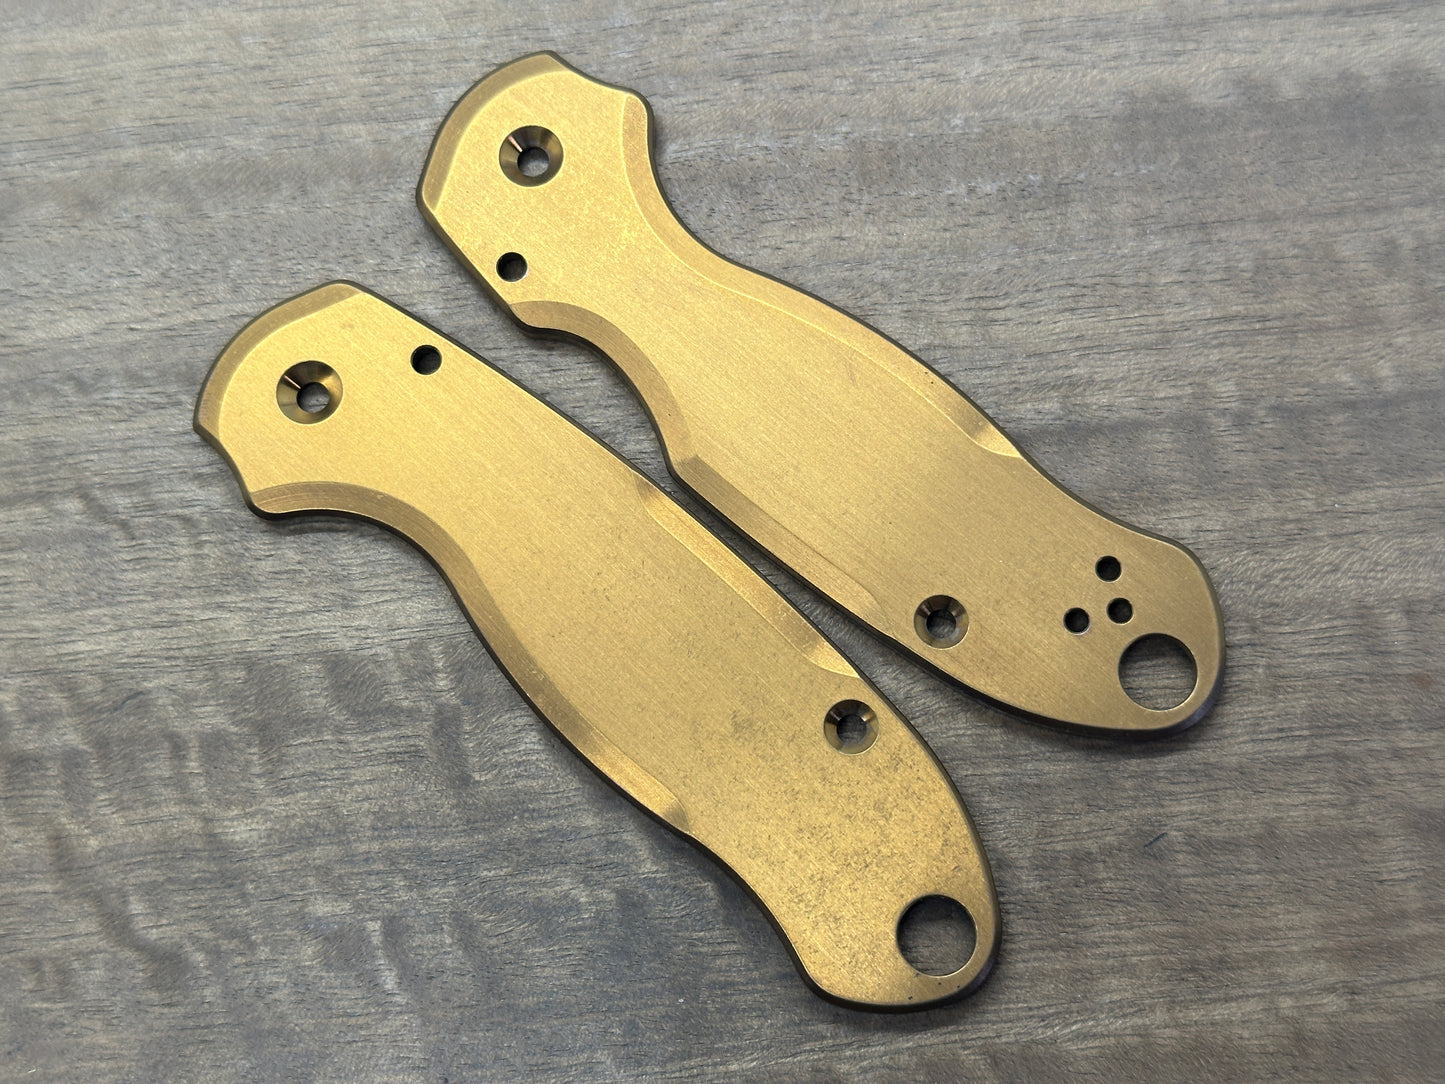 BRONZE Anodized Stone washed Titanium Scales for Spyderco Para 3